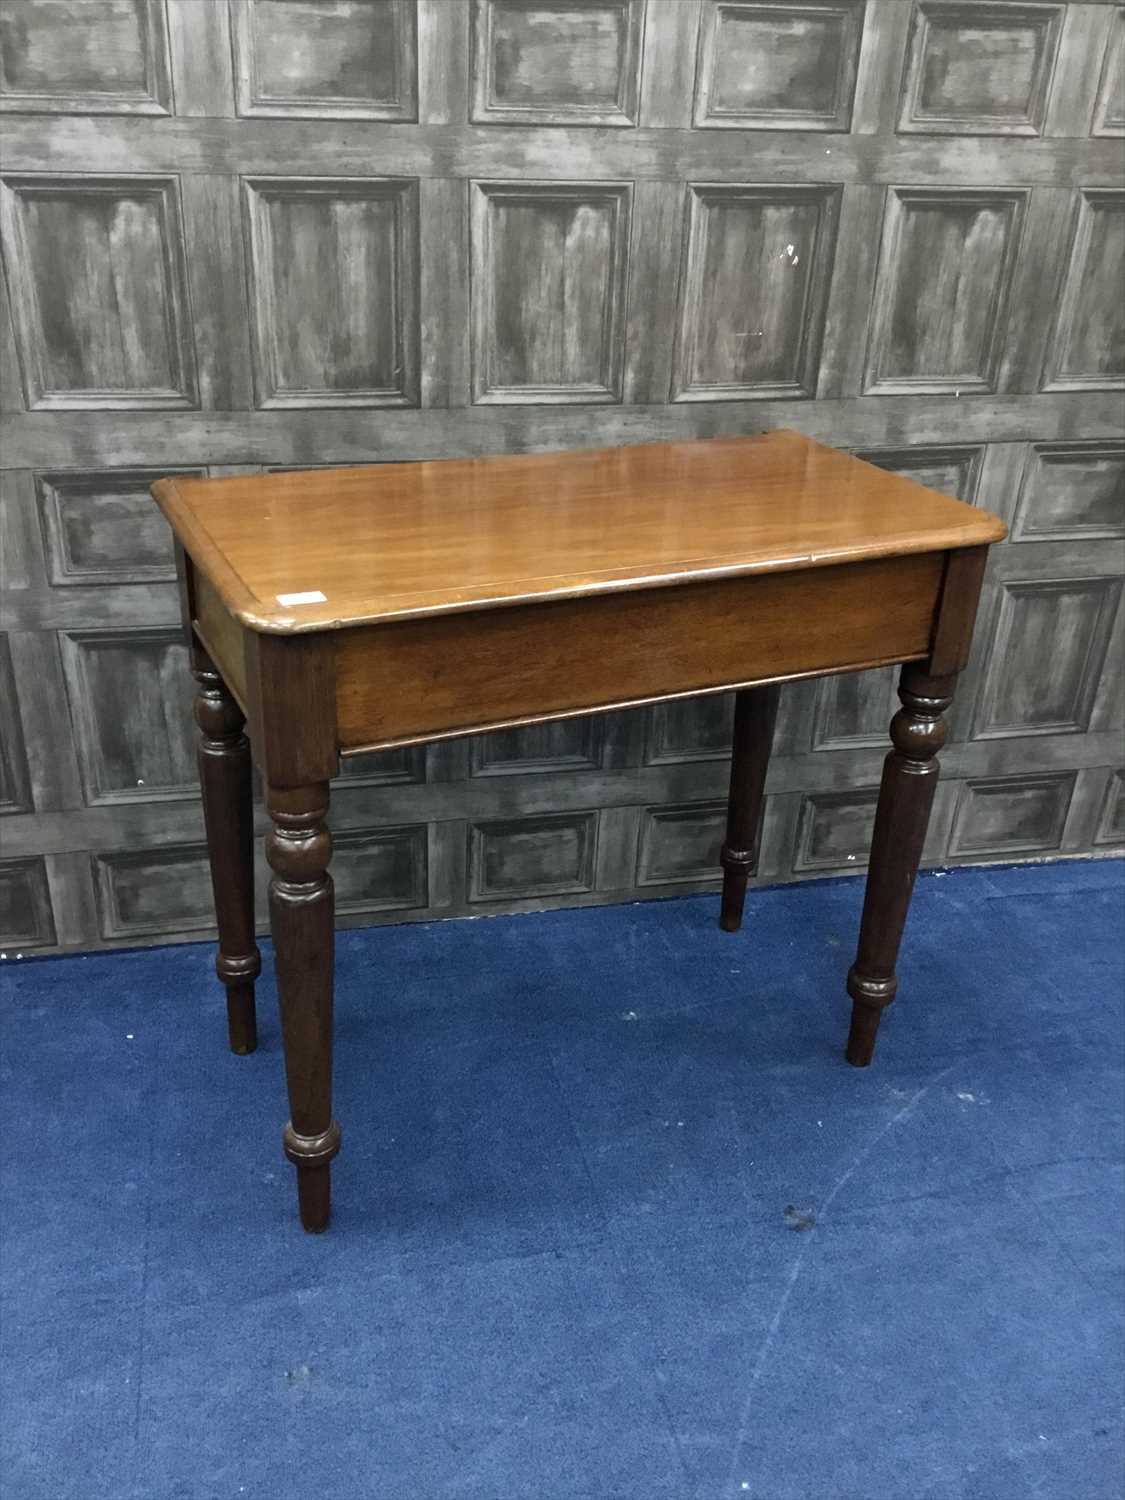 Lot 59 - A VICTORIAN MAHOGANY SIDE TABLE ALONG WITH A TABLE TOP